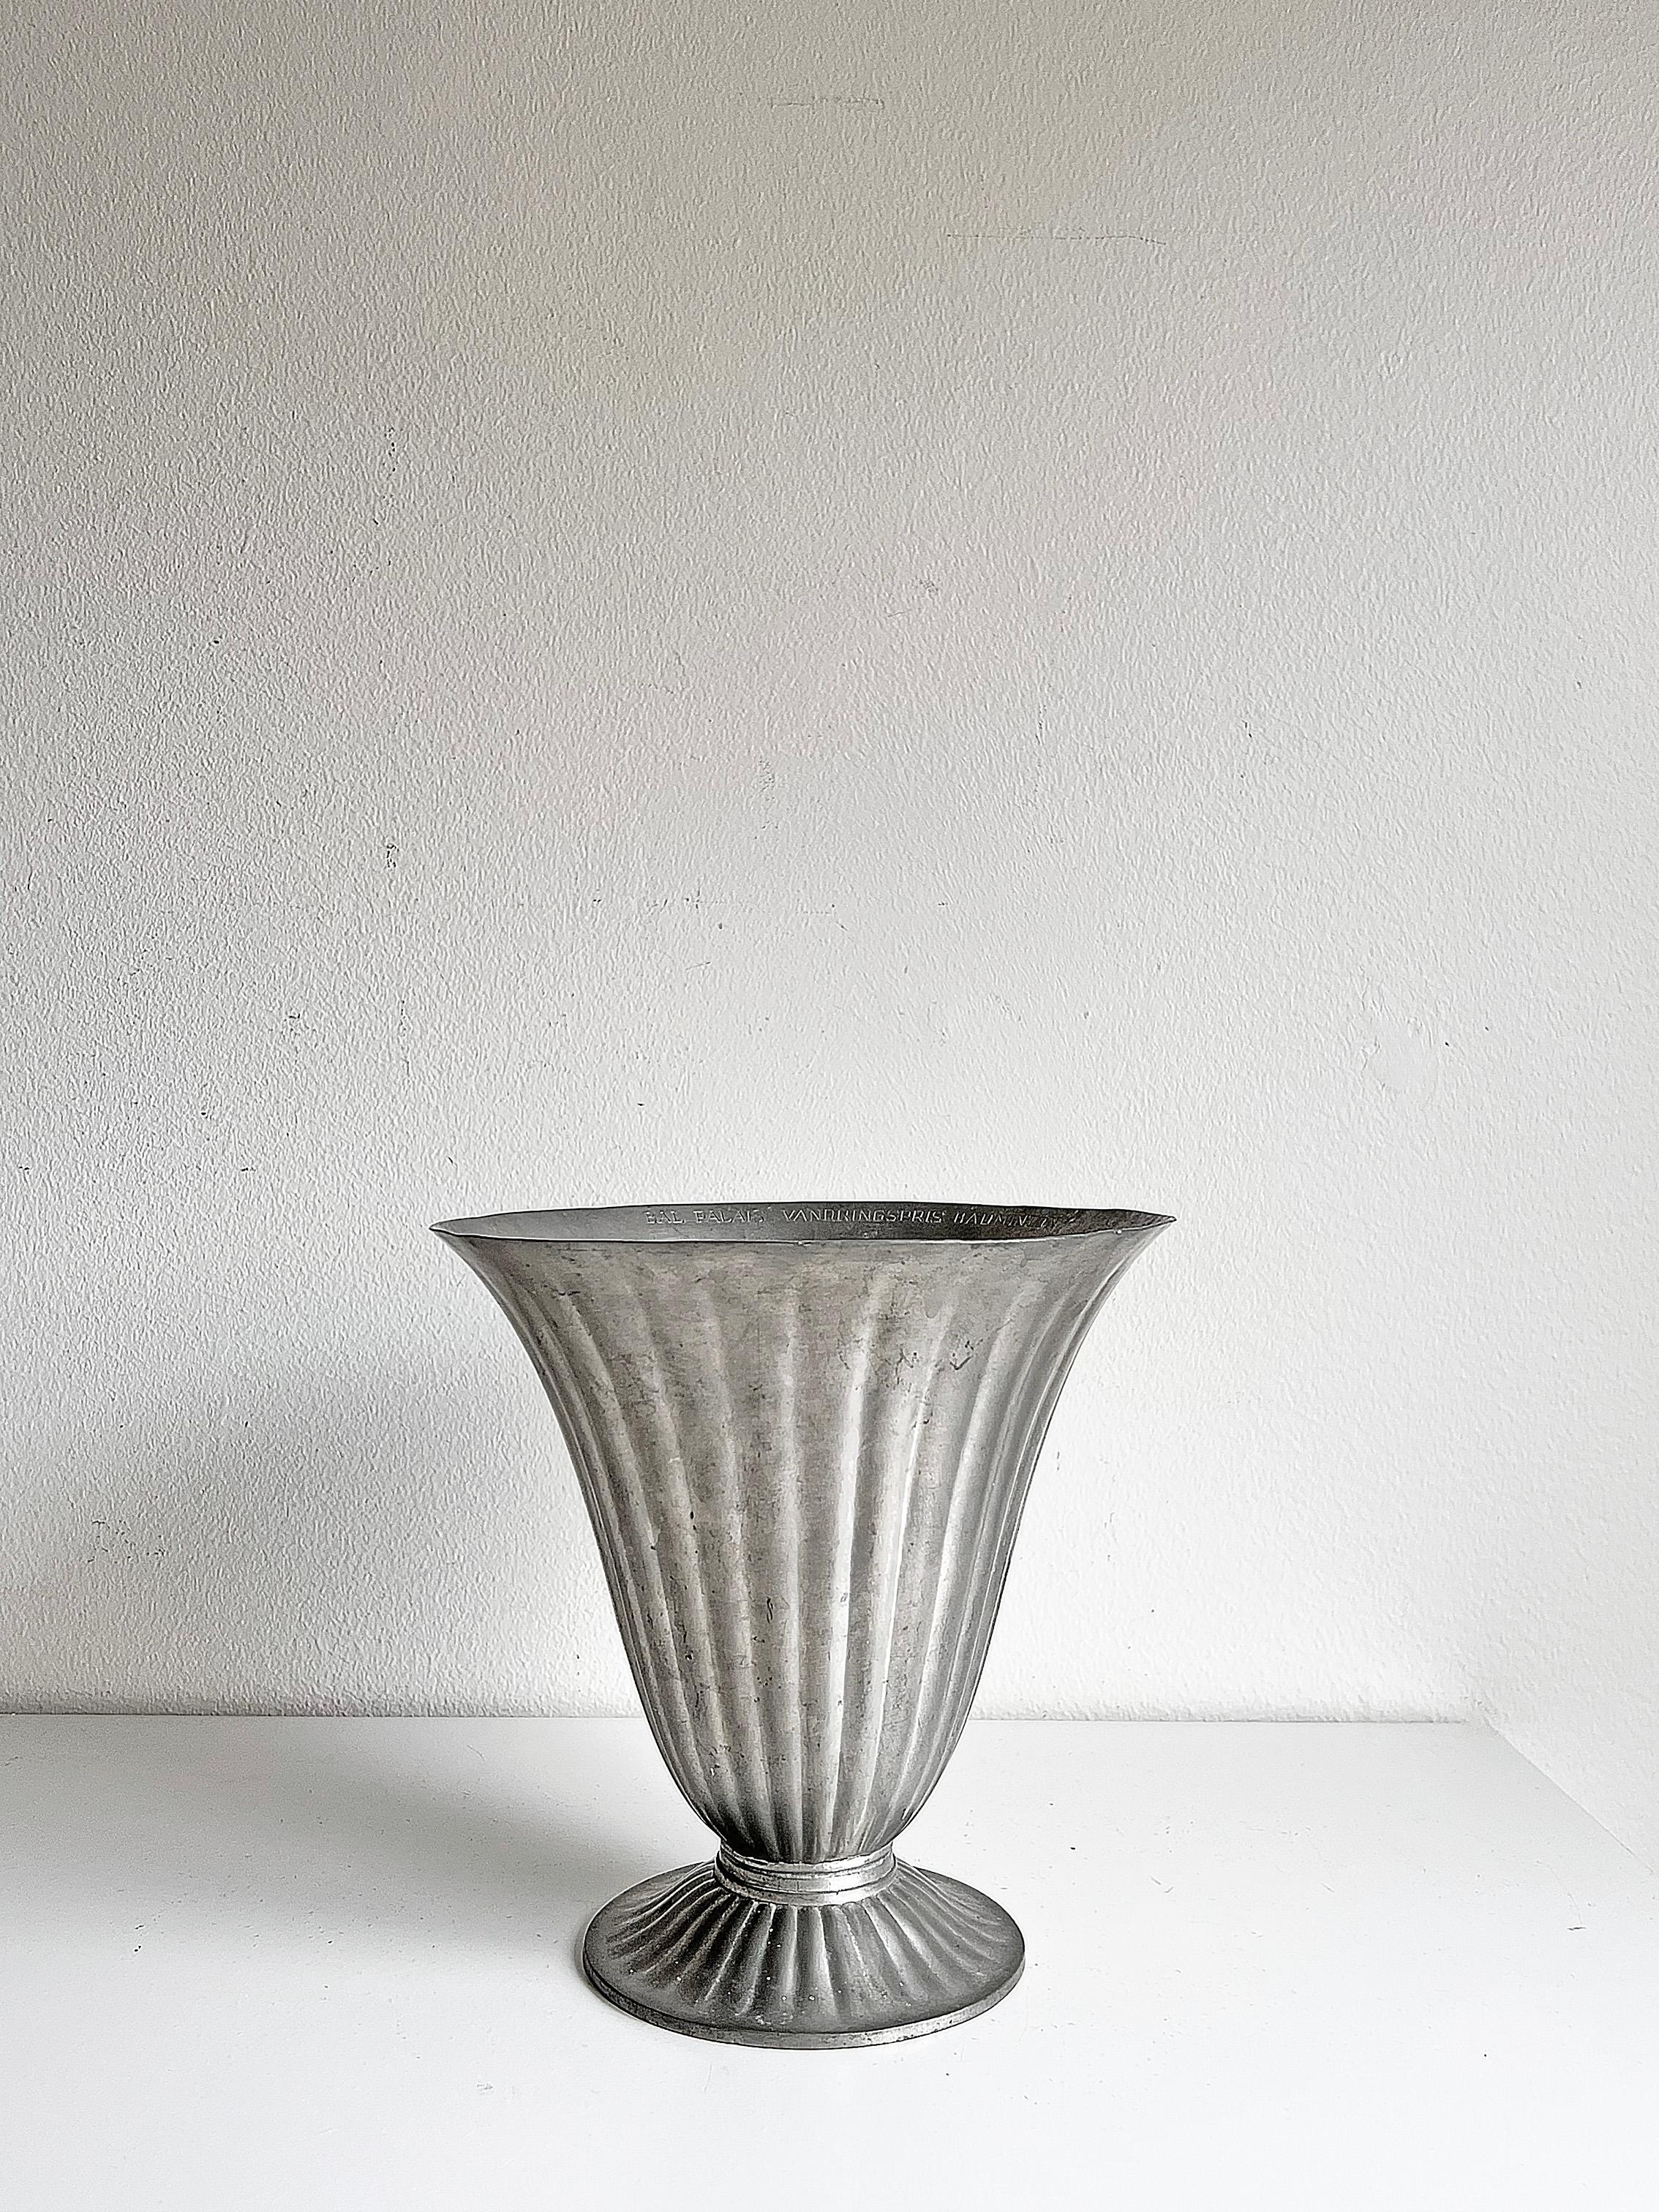 Nice and rare swedish modern cast pewter vase from GVH, Guldvaruhuset Aktiebolag, most probably from ca 1930-1940's. Please notice a discreet inscription inside of the vase, as seen on the last picture. 
Signed with makers mark.

Wear and patina